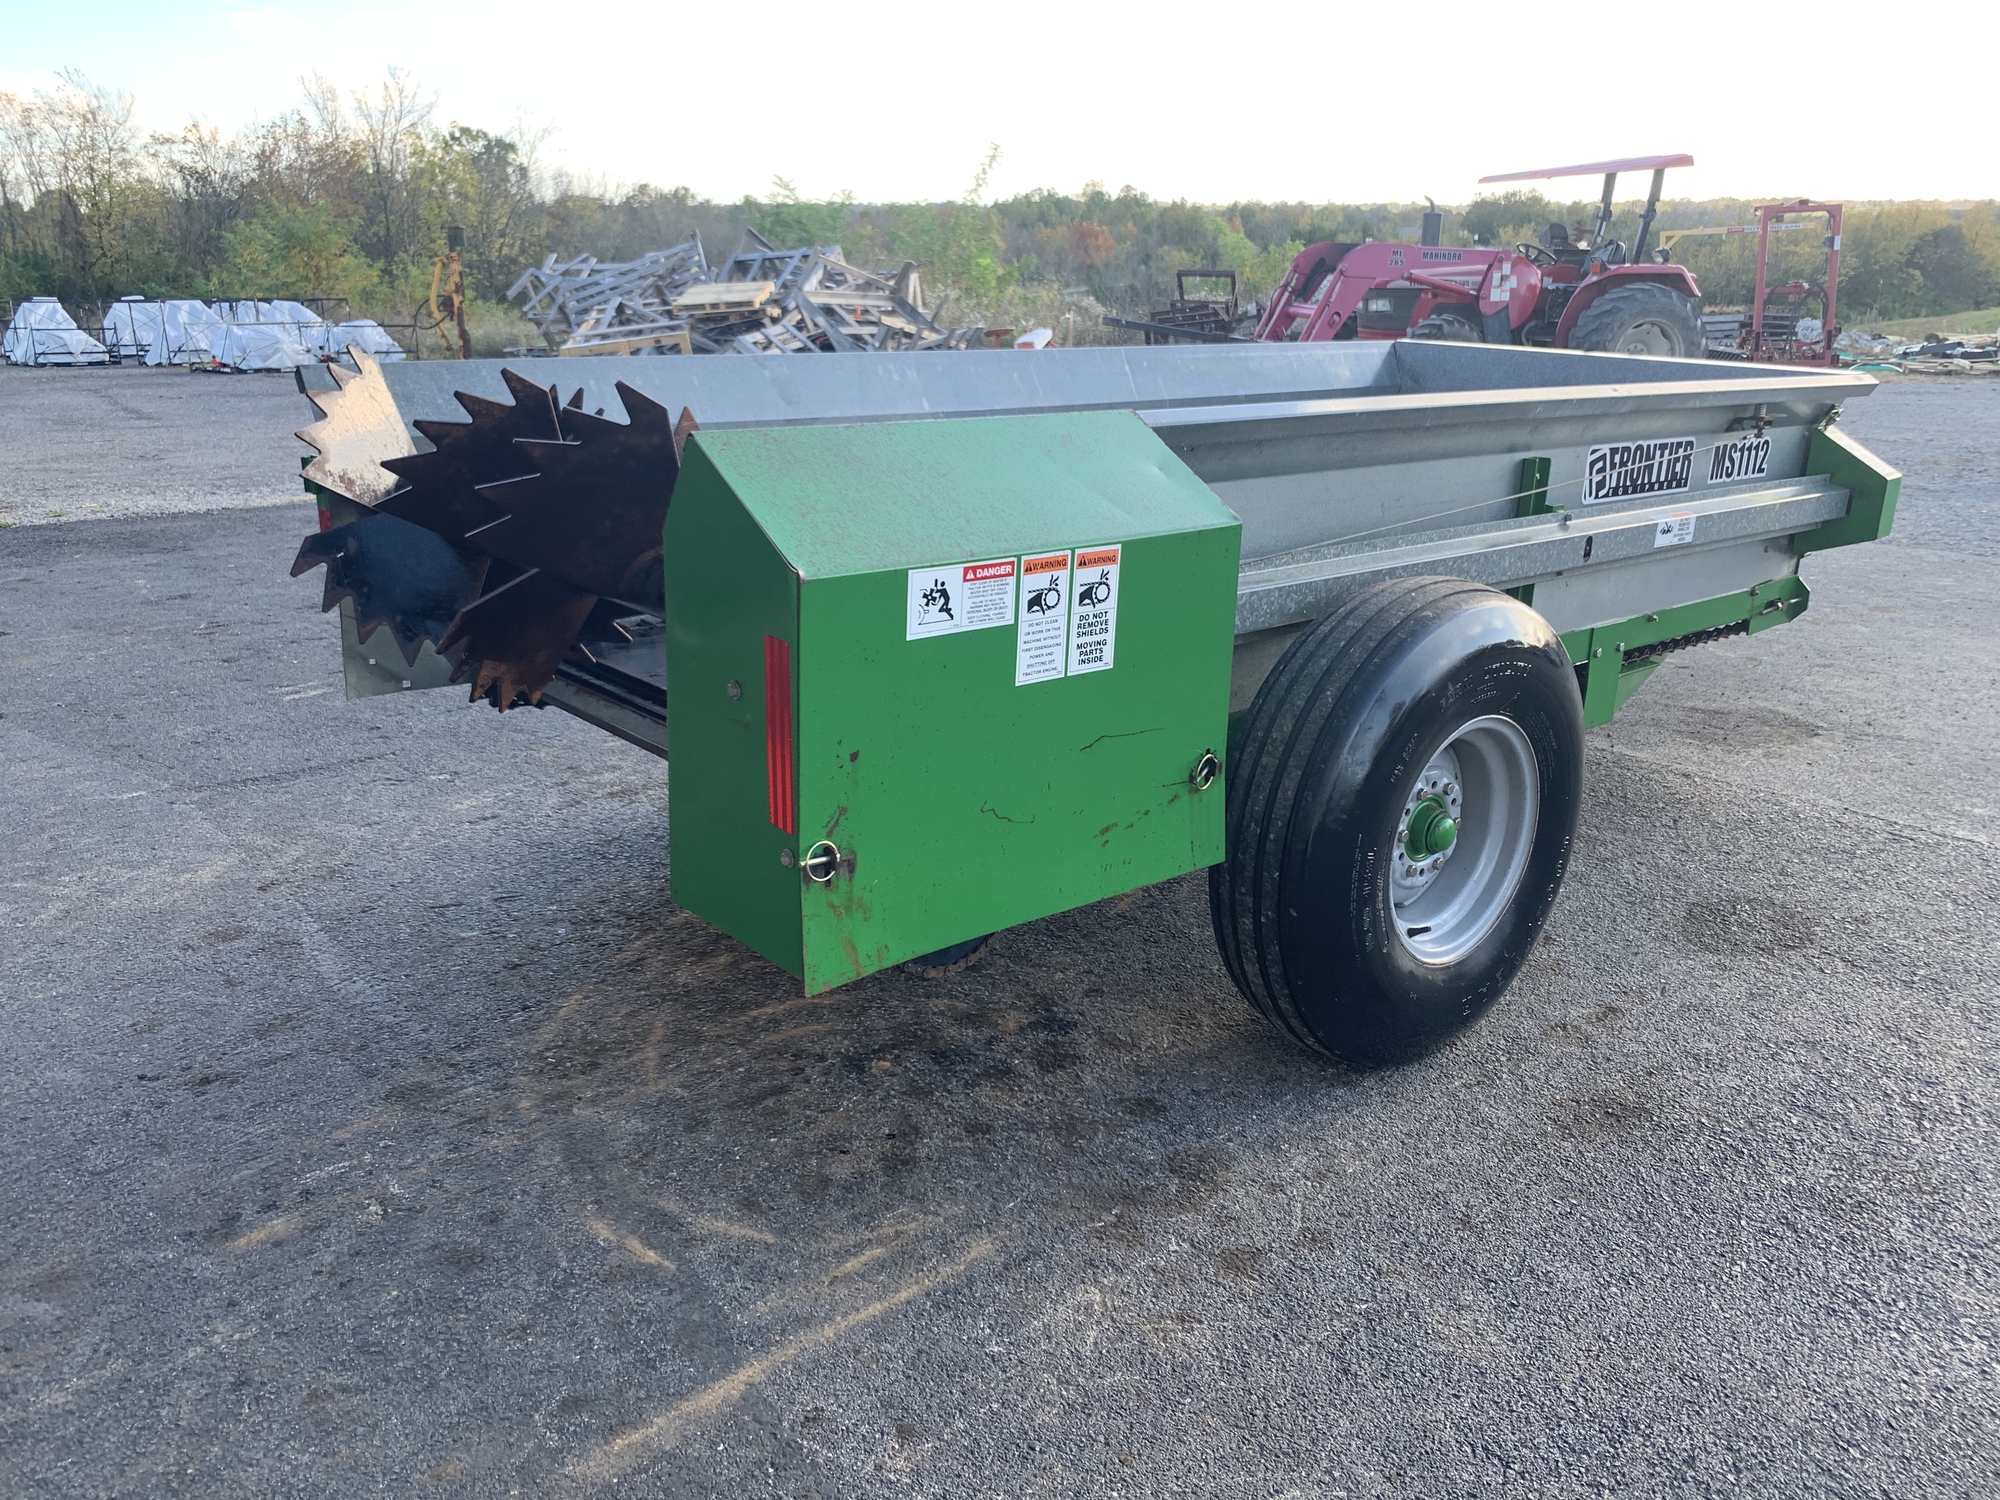 Frontier MS 1112 Manure Spreader | County Equipment Company LLC